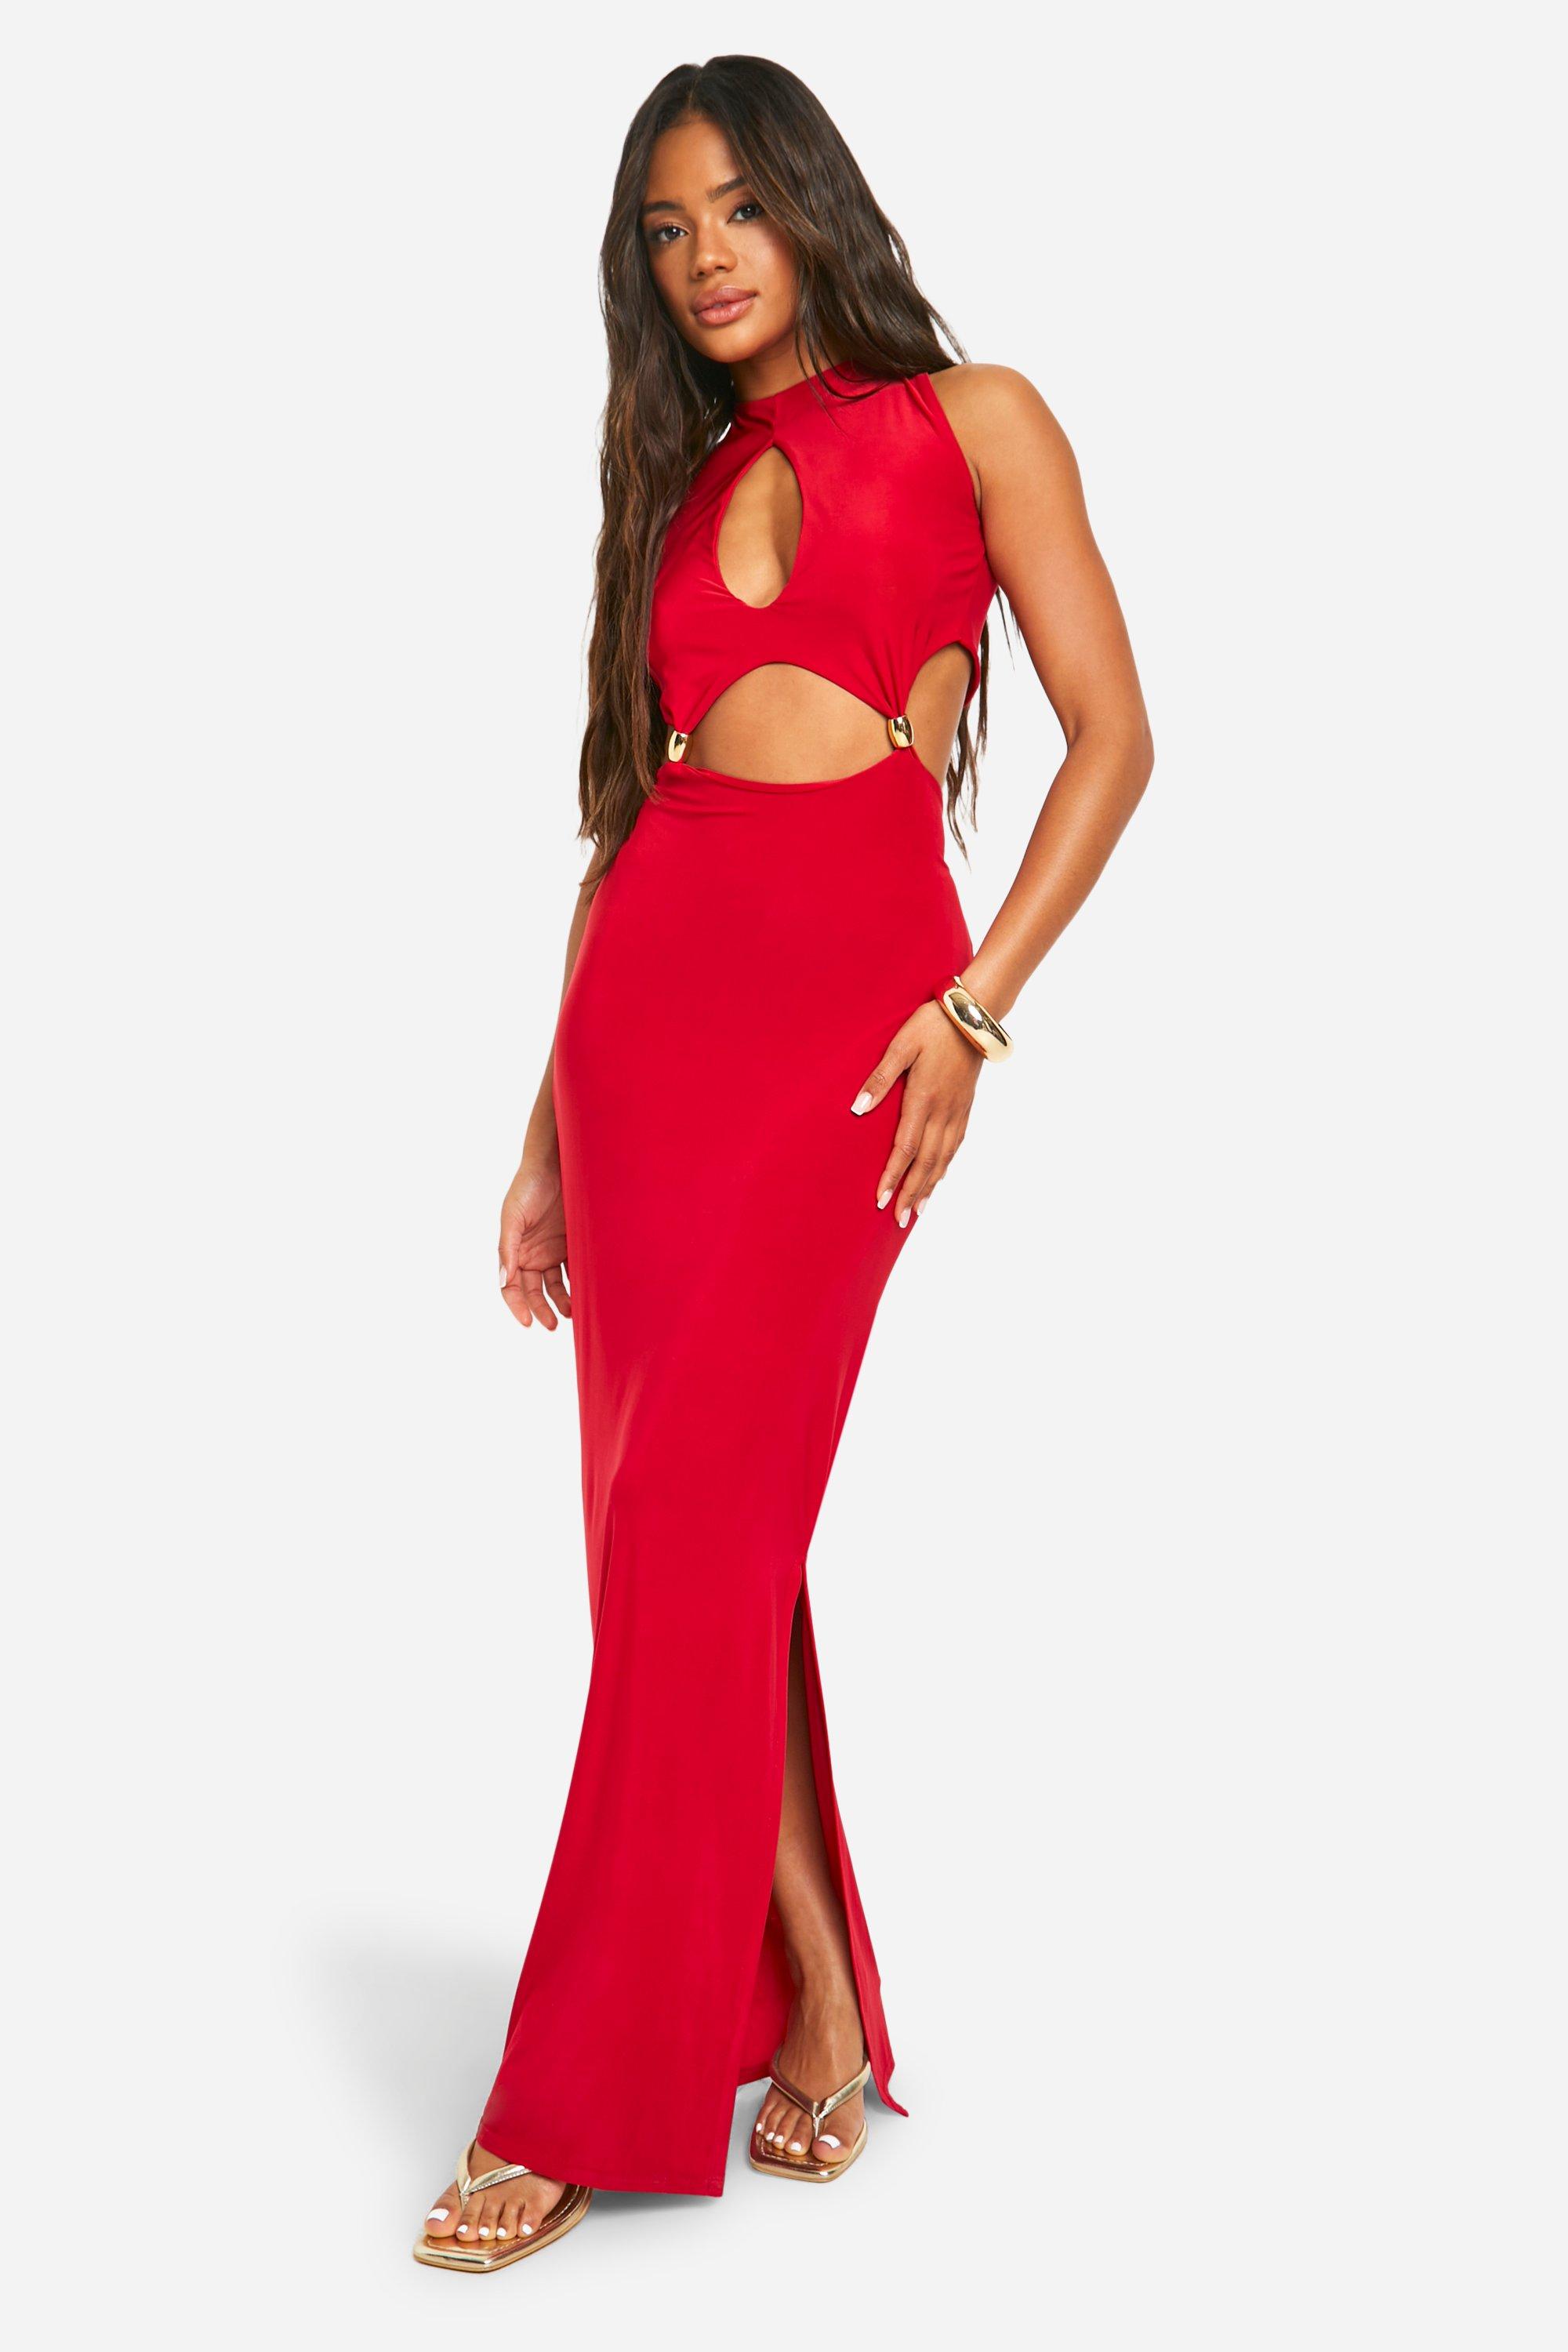 Boohoo Halterneck Cut Out Beaded Maxi Dress, Red